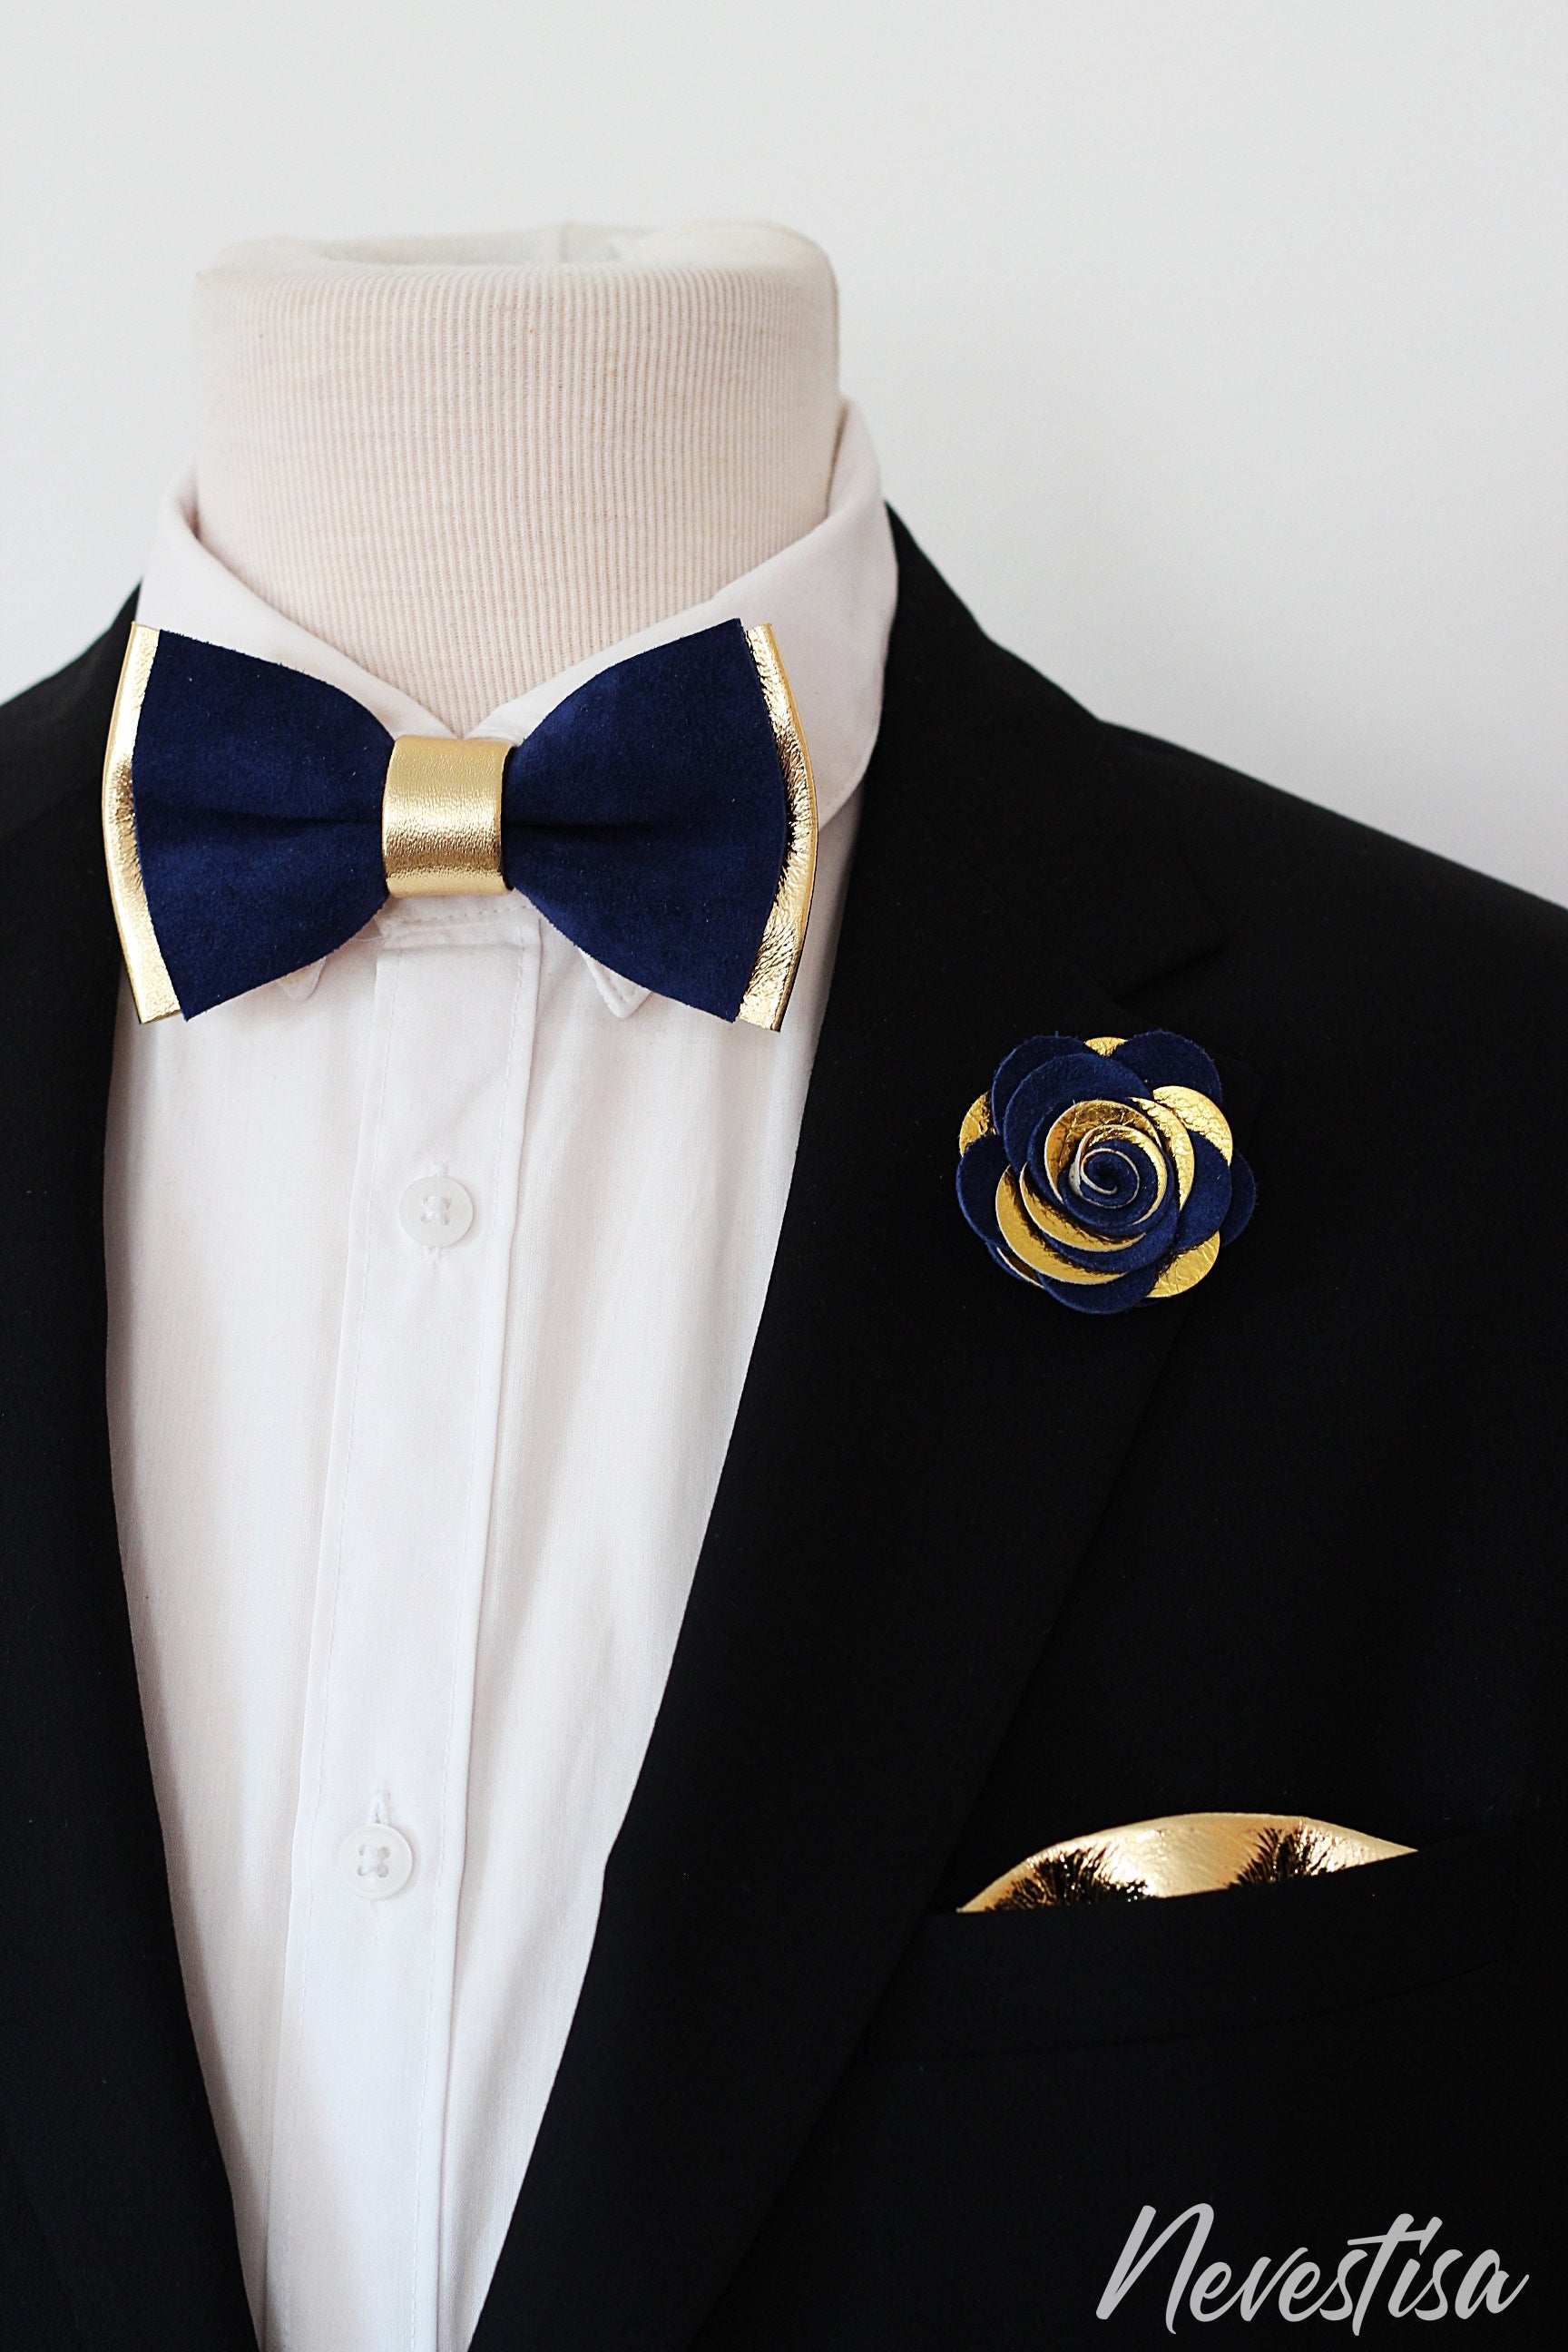 Royal Blue Bow Tie